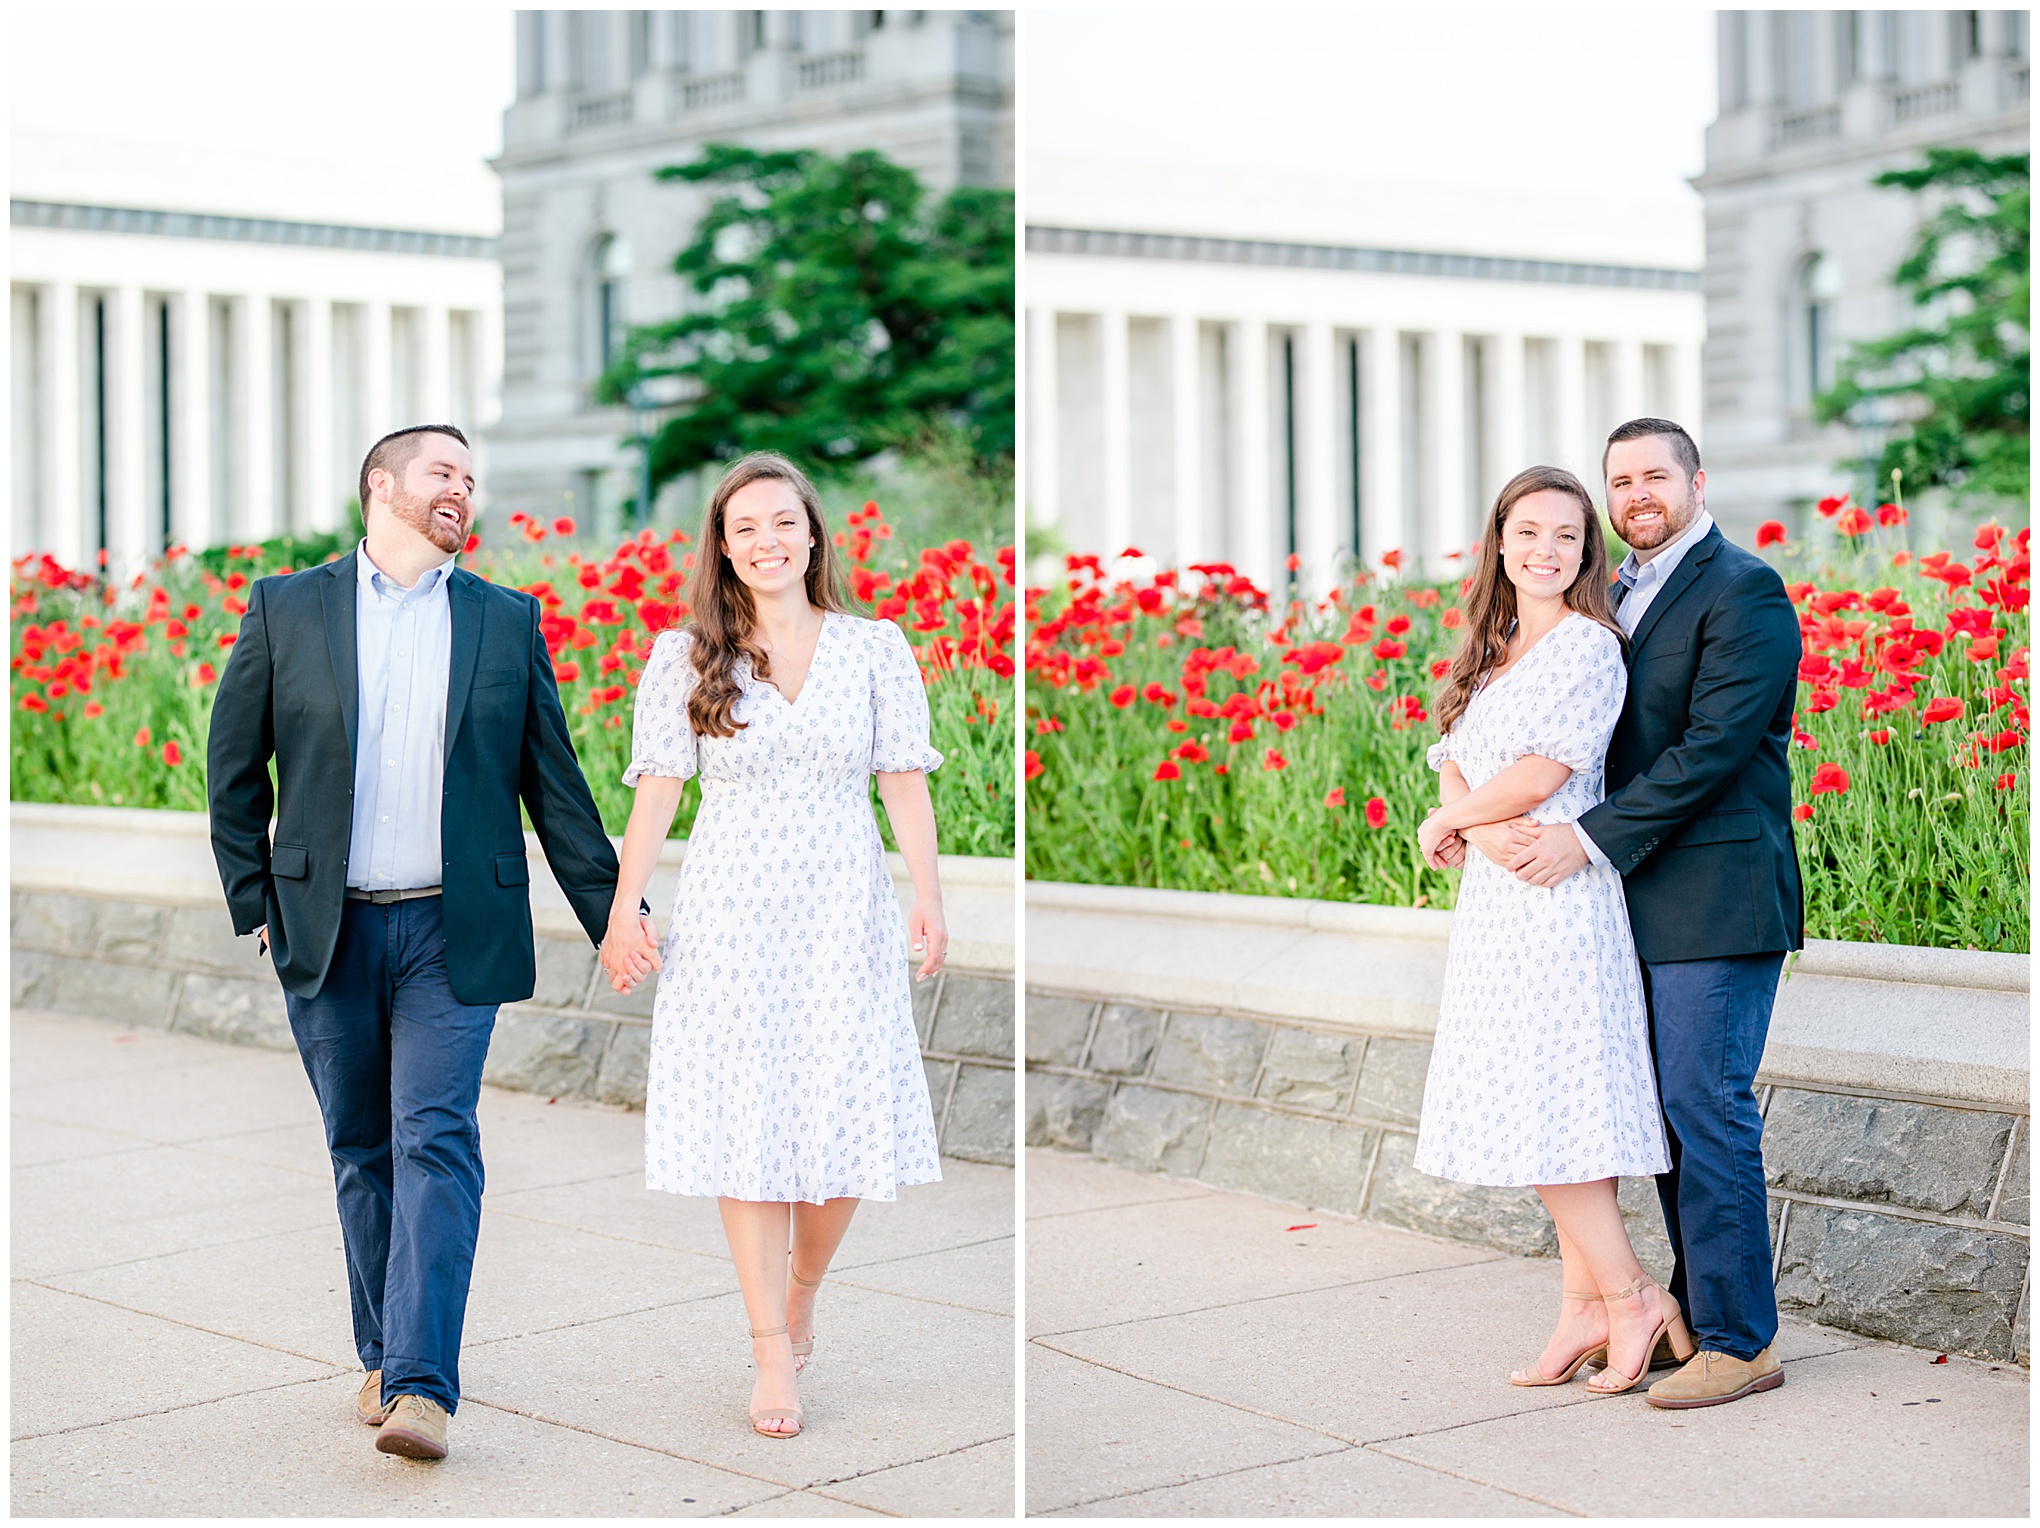 Capitol Hill engagement session, Capitol Hill portraits, D.C. engagement photography, D.C. engagement photographer, D.C. Capitol Hill D.C., DC photography, engagement photography, Rachel E.H. Photography, classic engagement photos, spring engagement photos, poppies